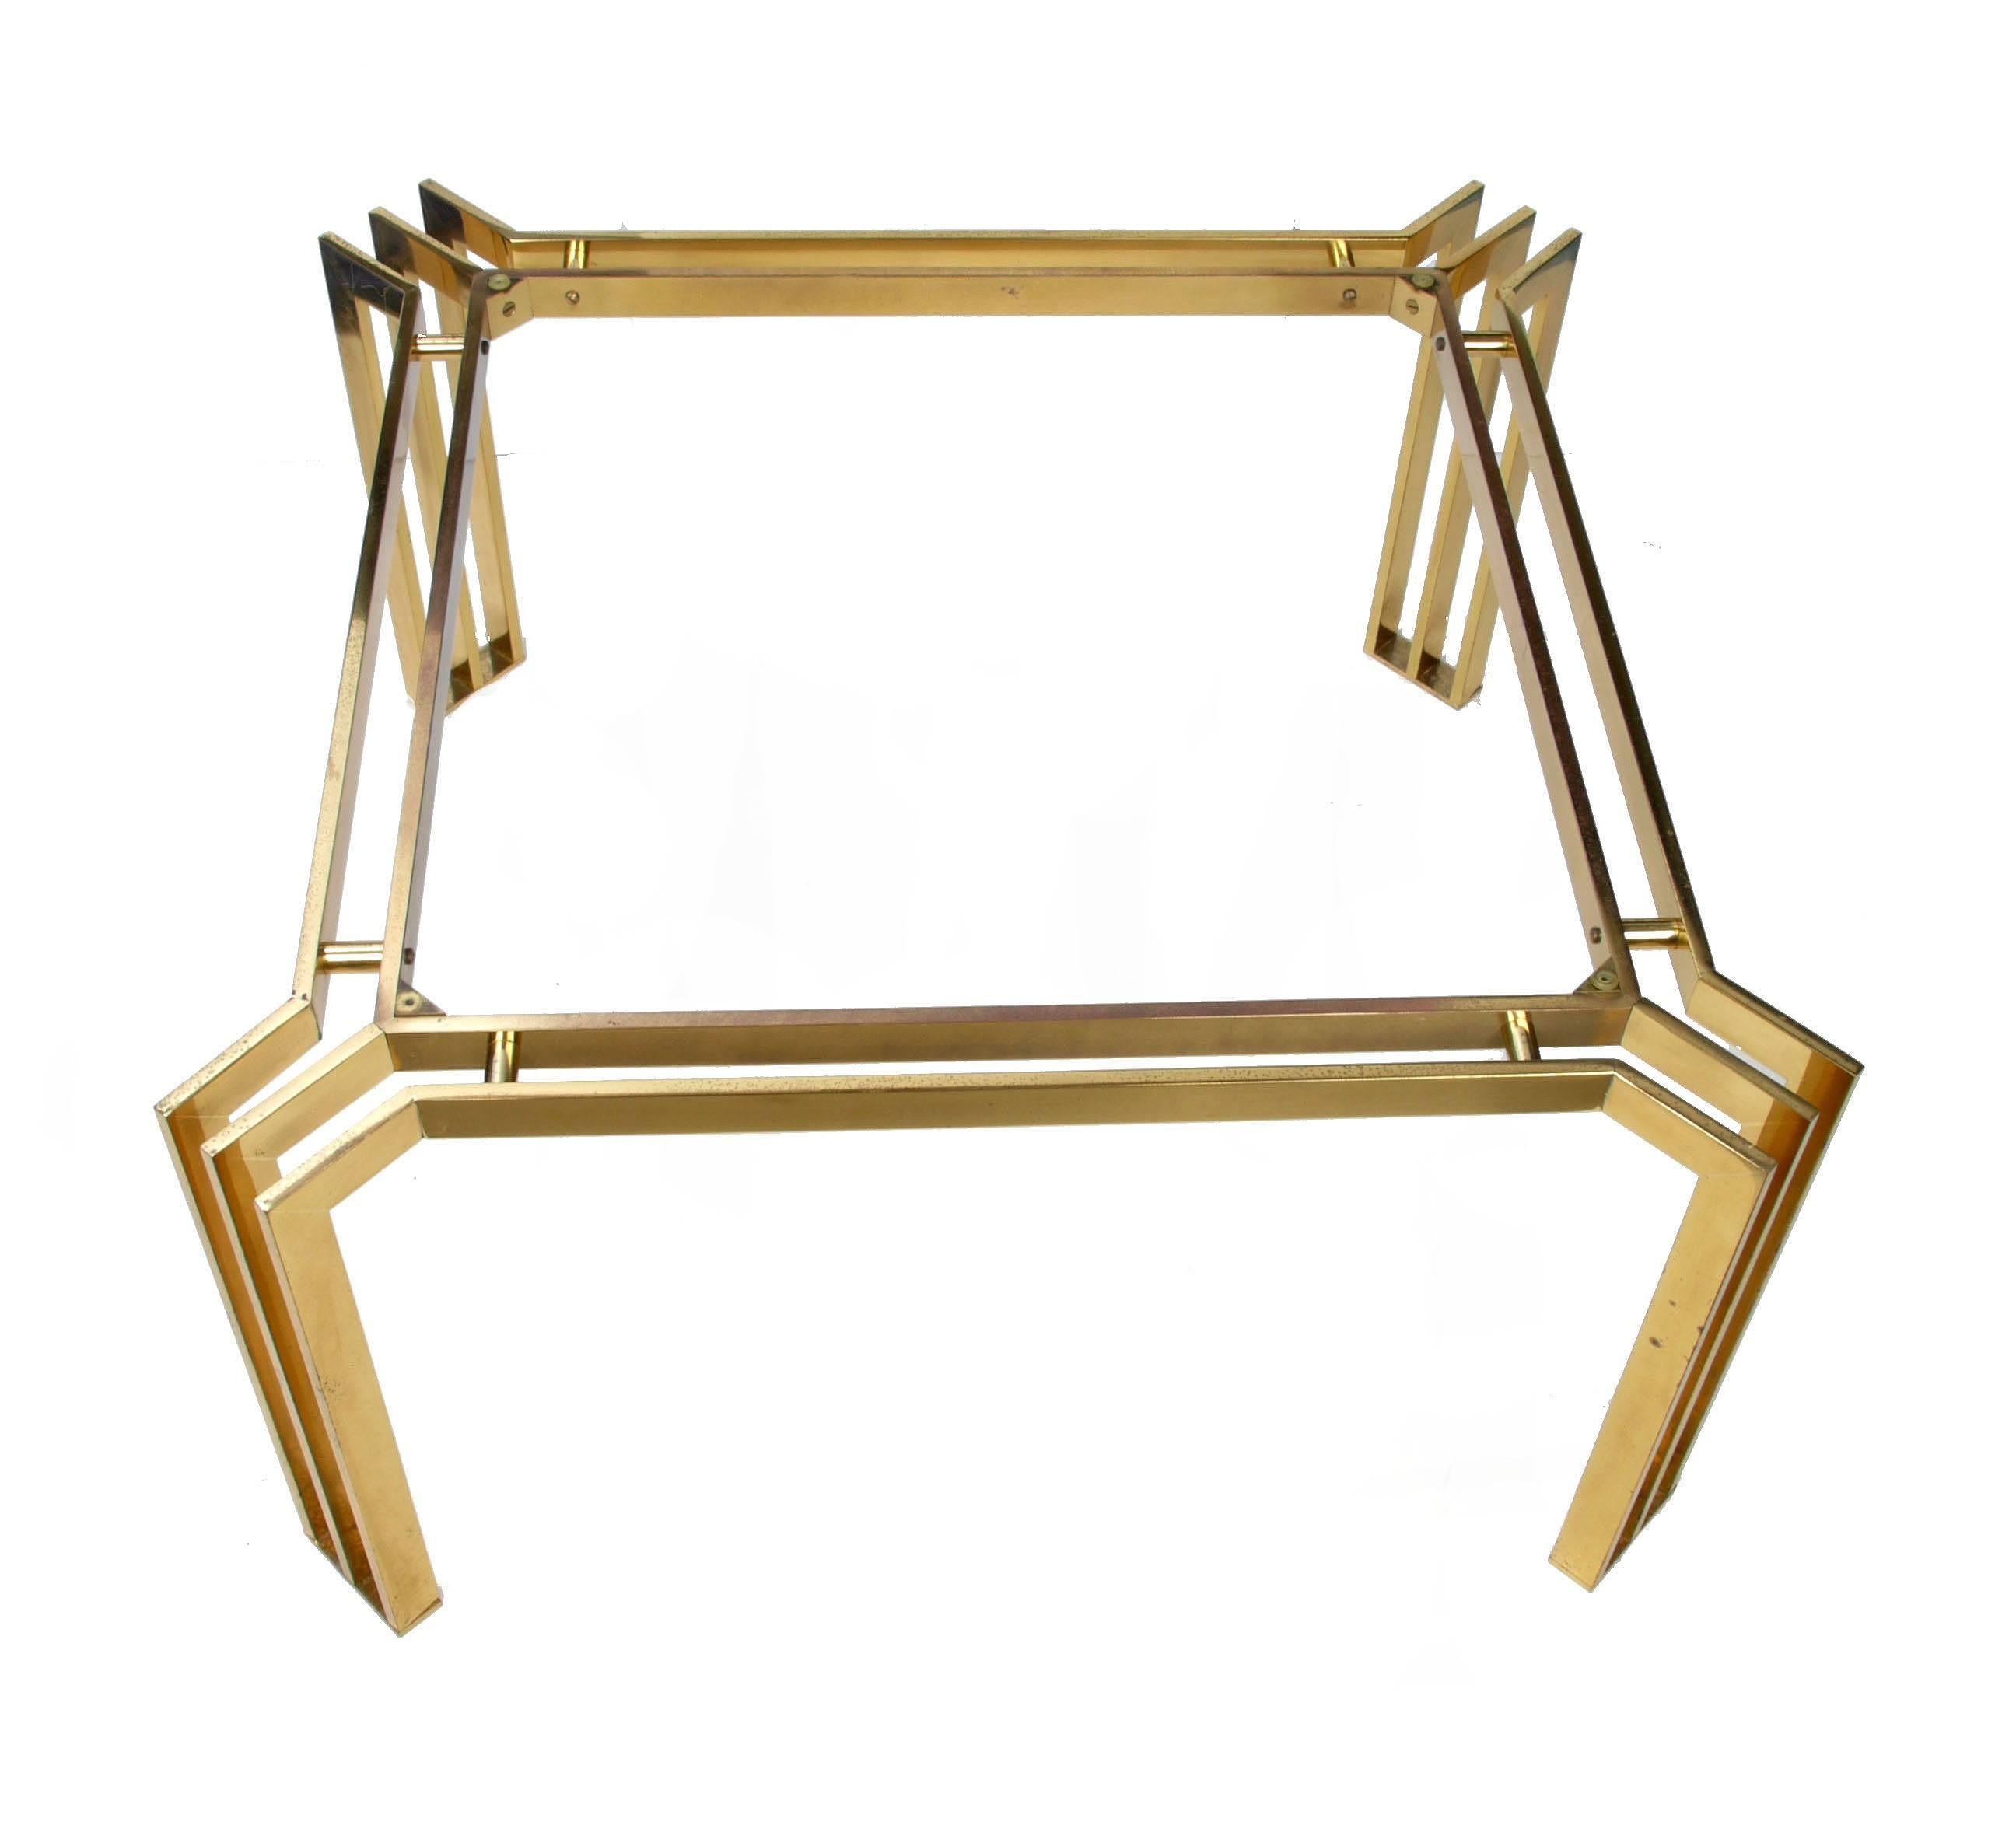 Cool Italian Mid-Century Modern Square Brass Coffee Table In Good Condition For Sale In Miami, FL